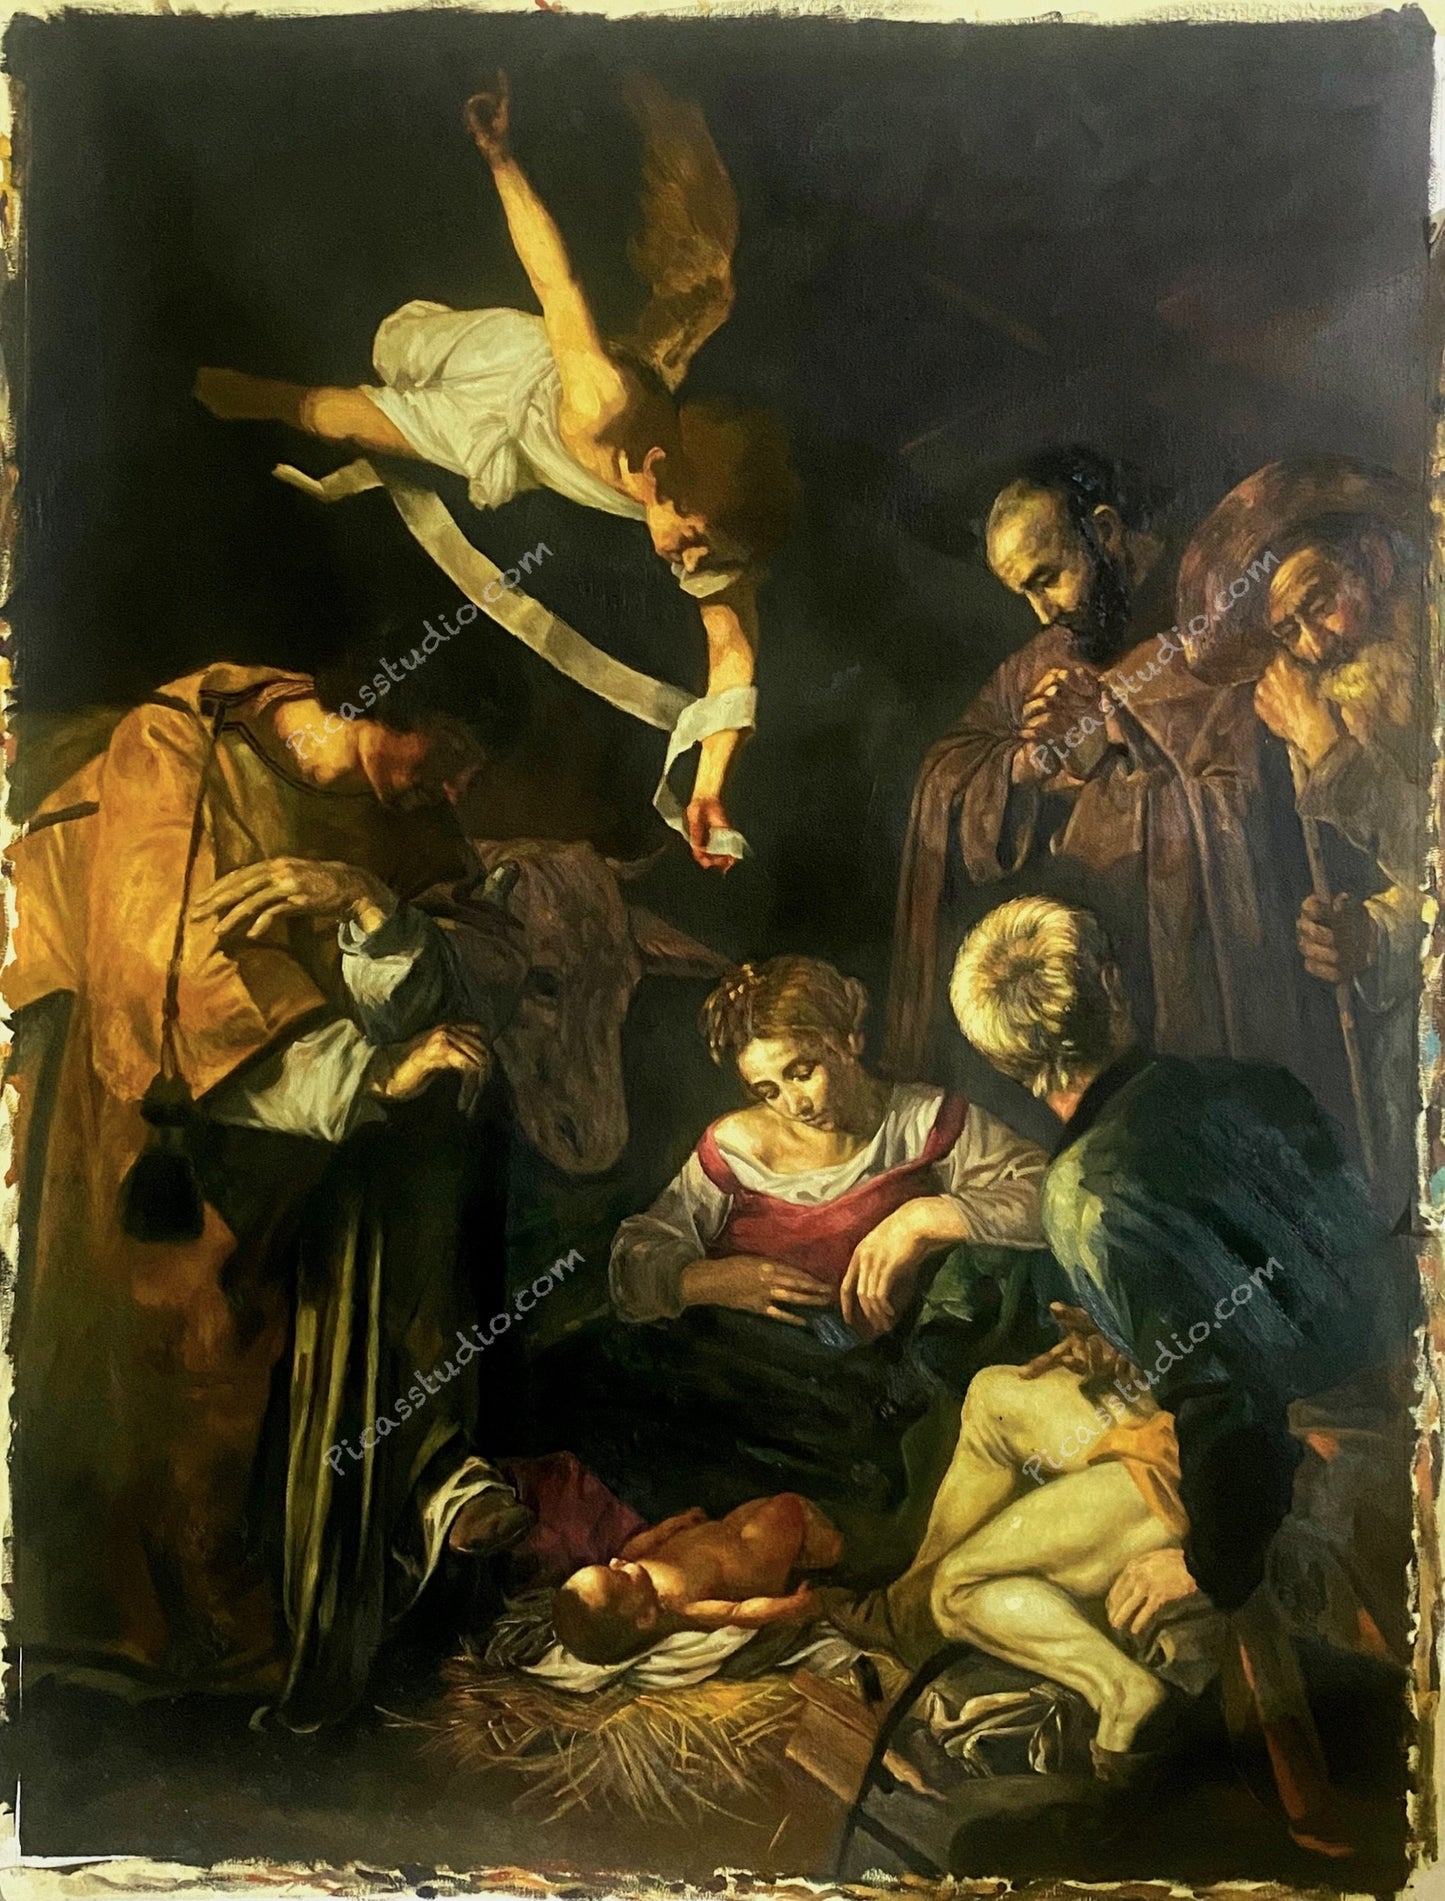 Nativity with St. Francis and St. Lawrence by Caravaggio Portrait Oil Painting Hand Painted Art on Canvas Wall Decor Unframed